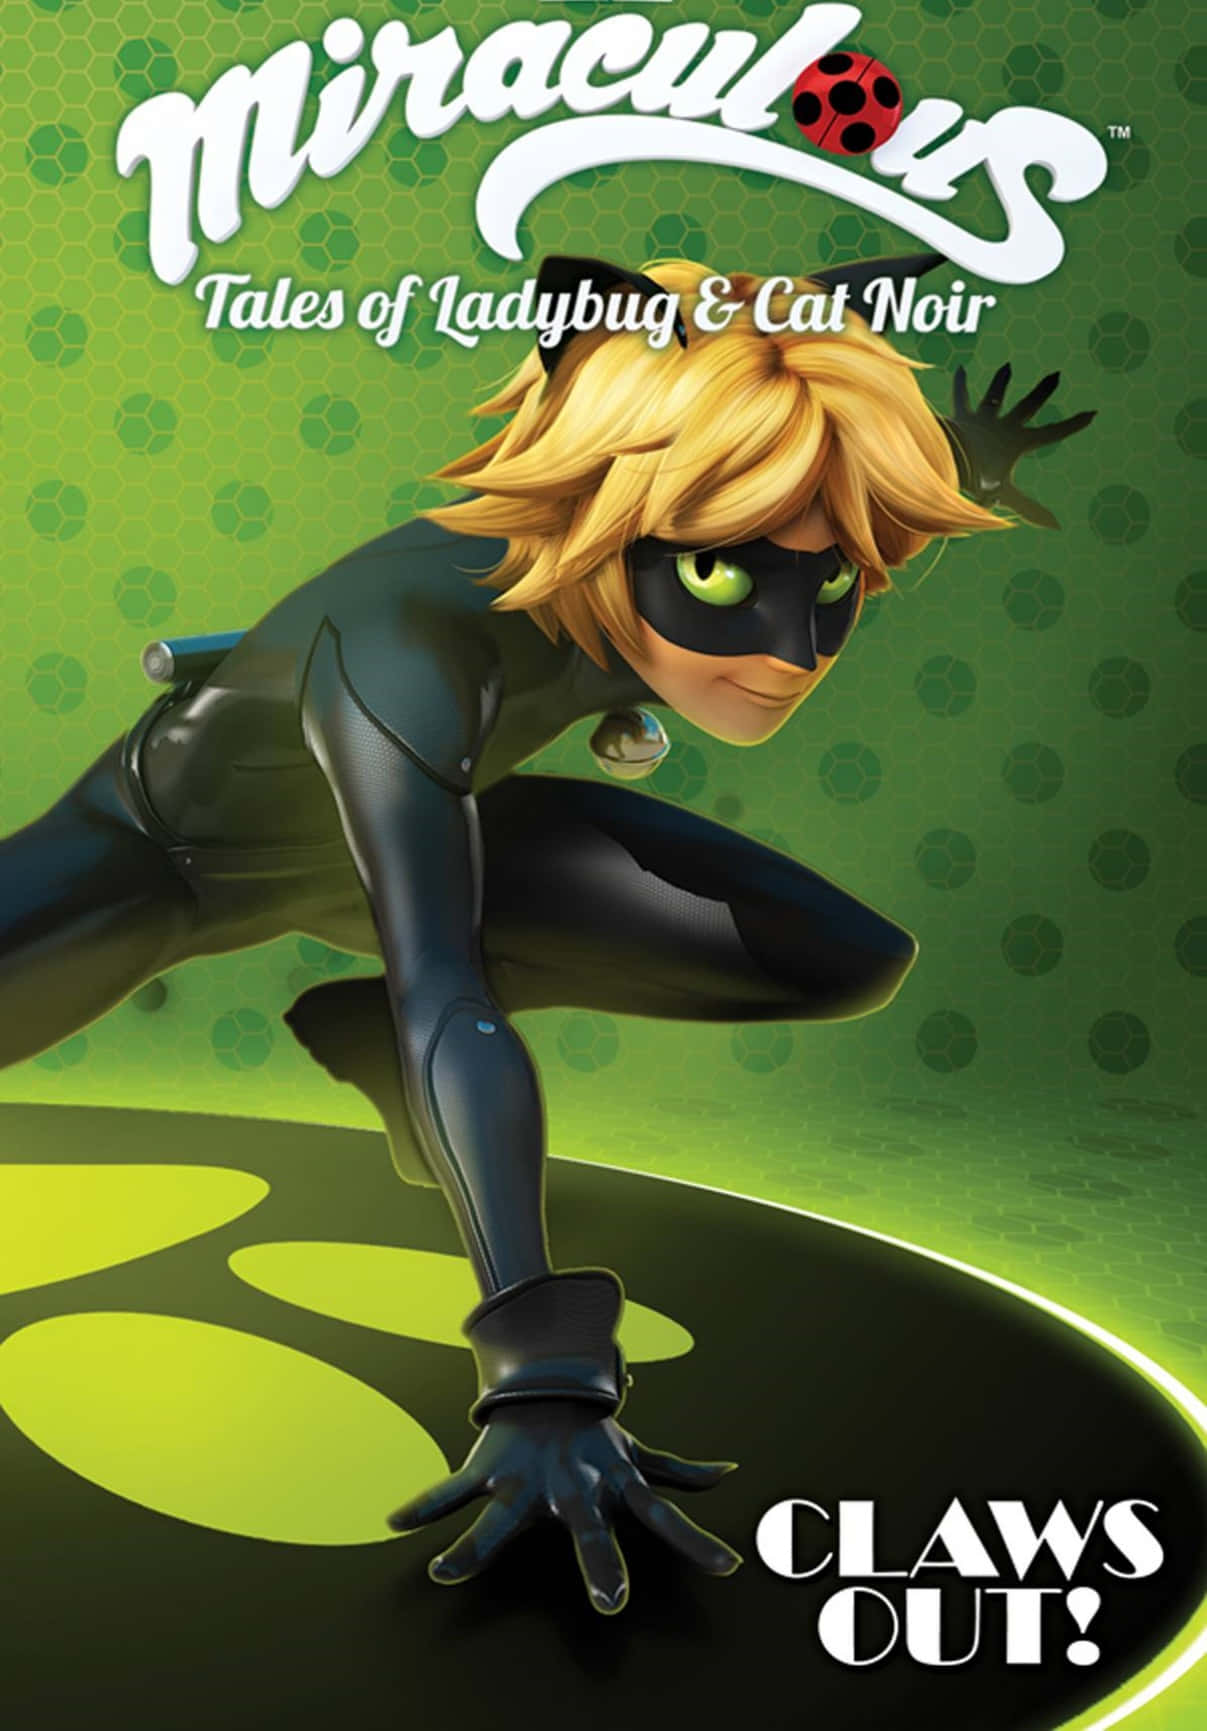 Experience the Thrill of Adventure with Cat Noir!